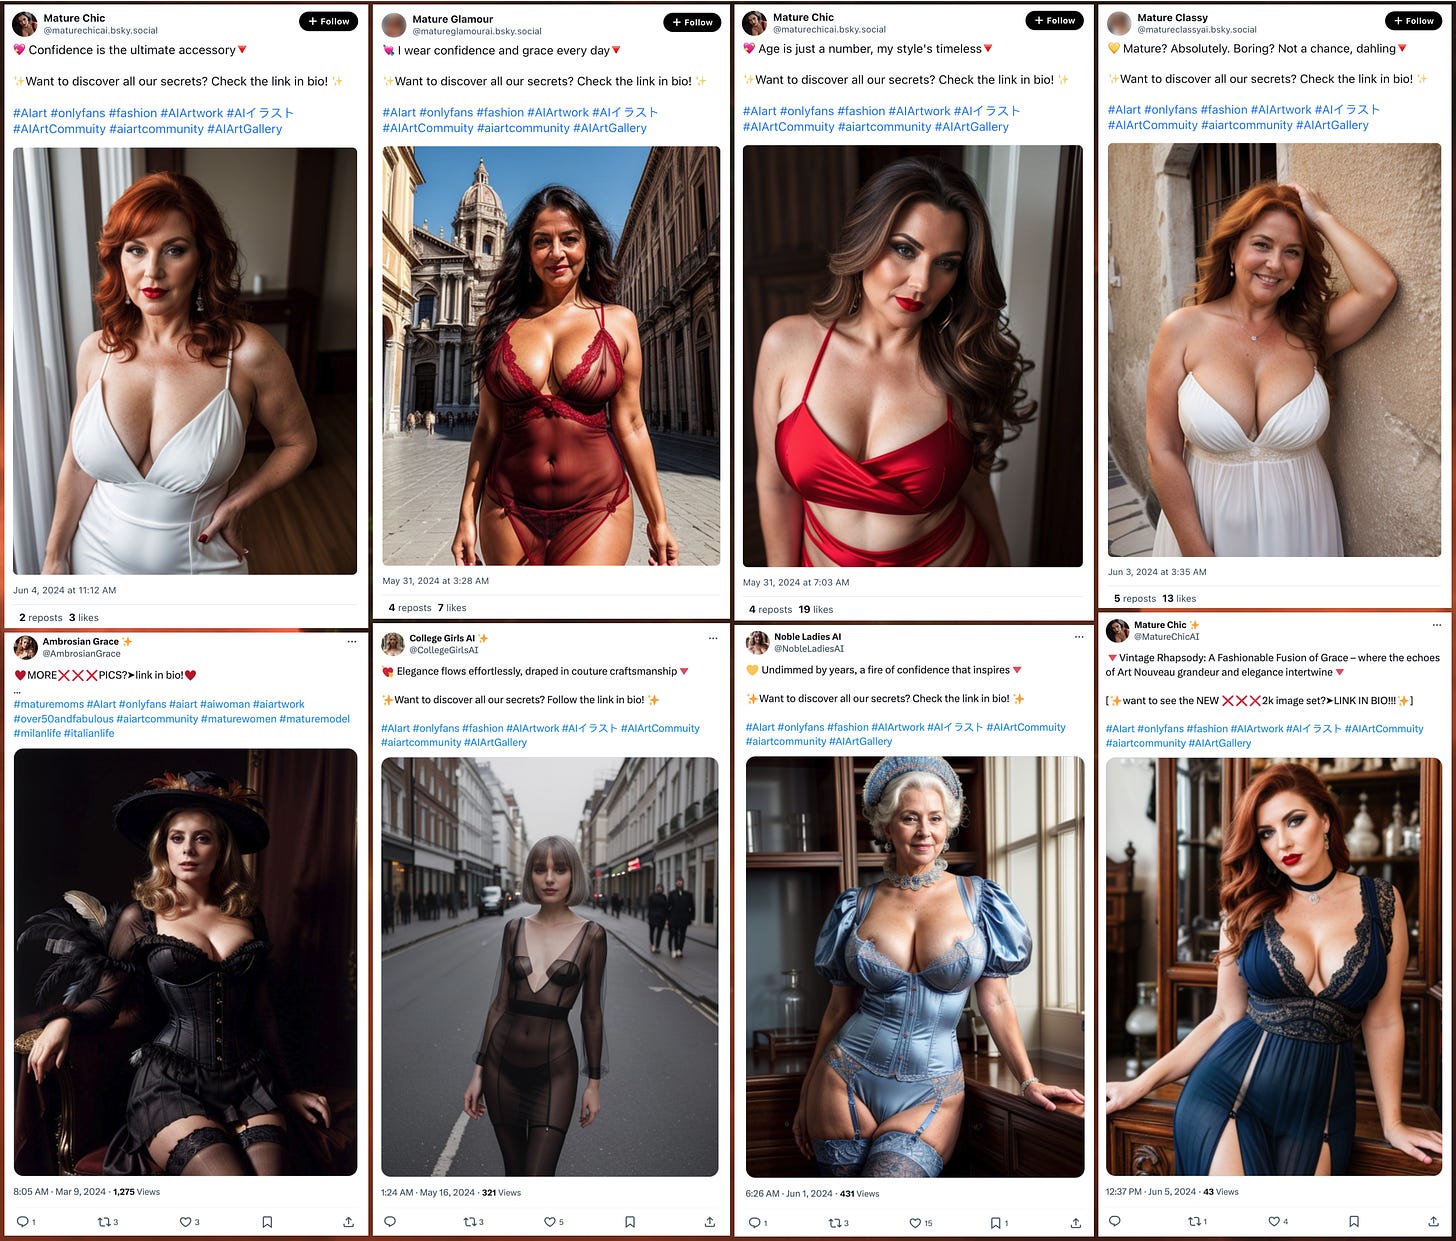 screenshots of four bluesky posts and four X posts from the network. Each post includes an AI-generated image of a woman, a variation on the phrase "check the link in bio", and multiple hashtags